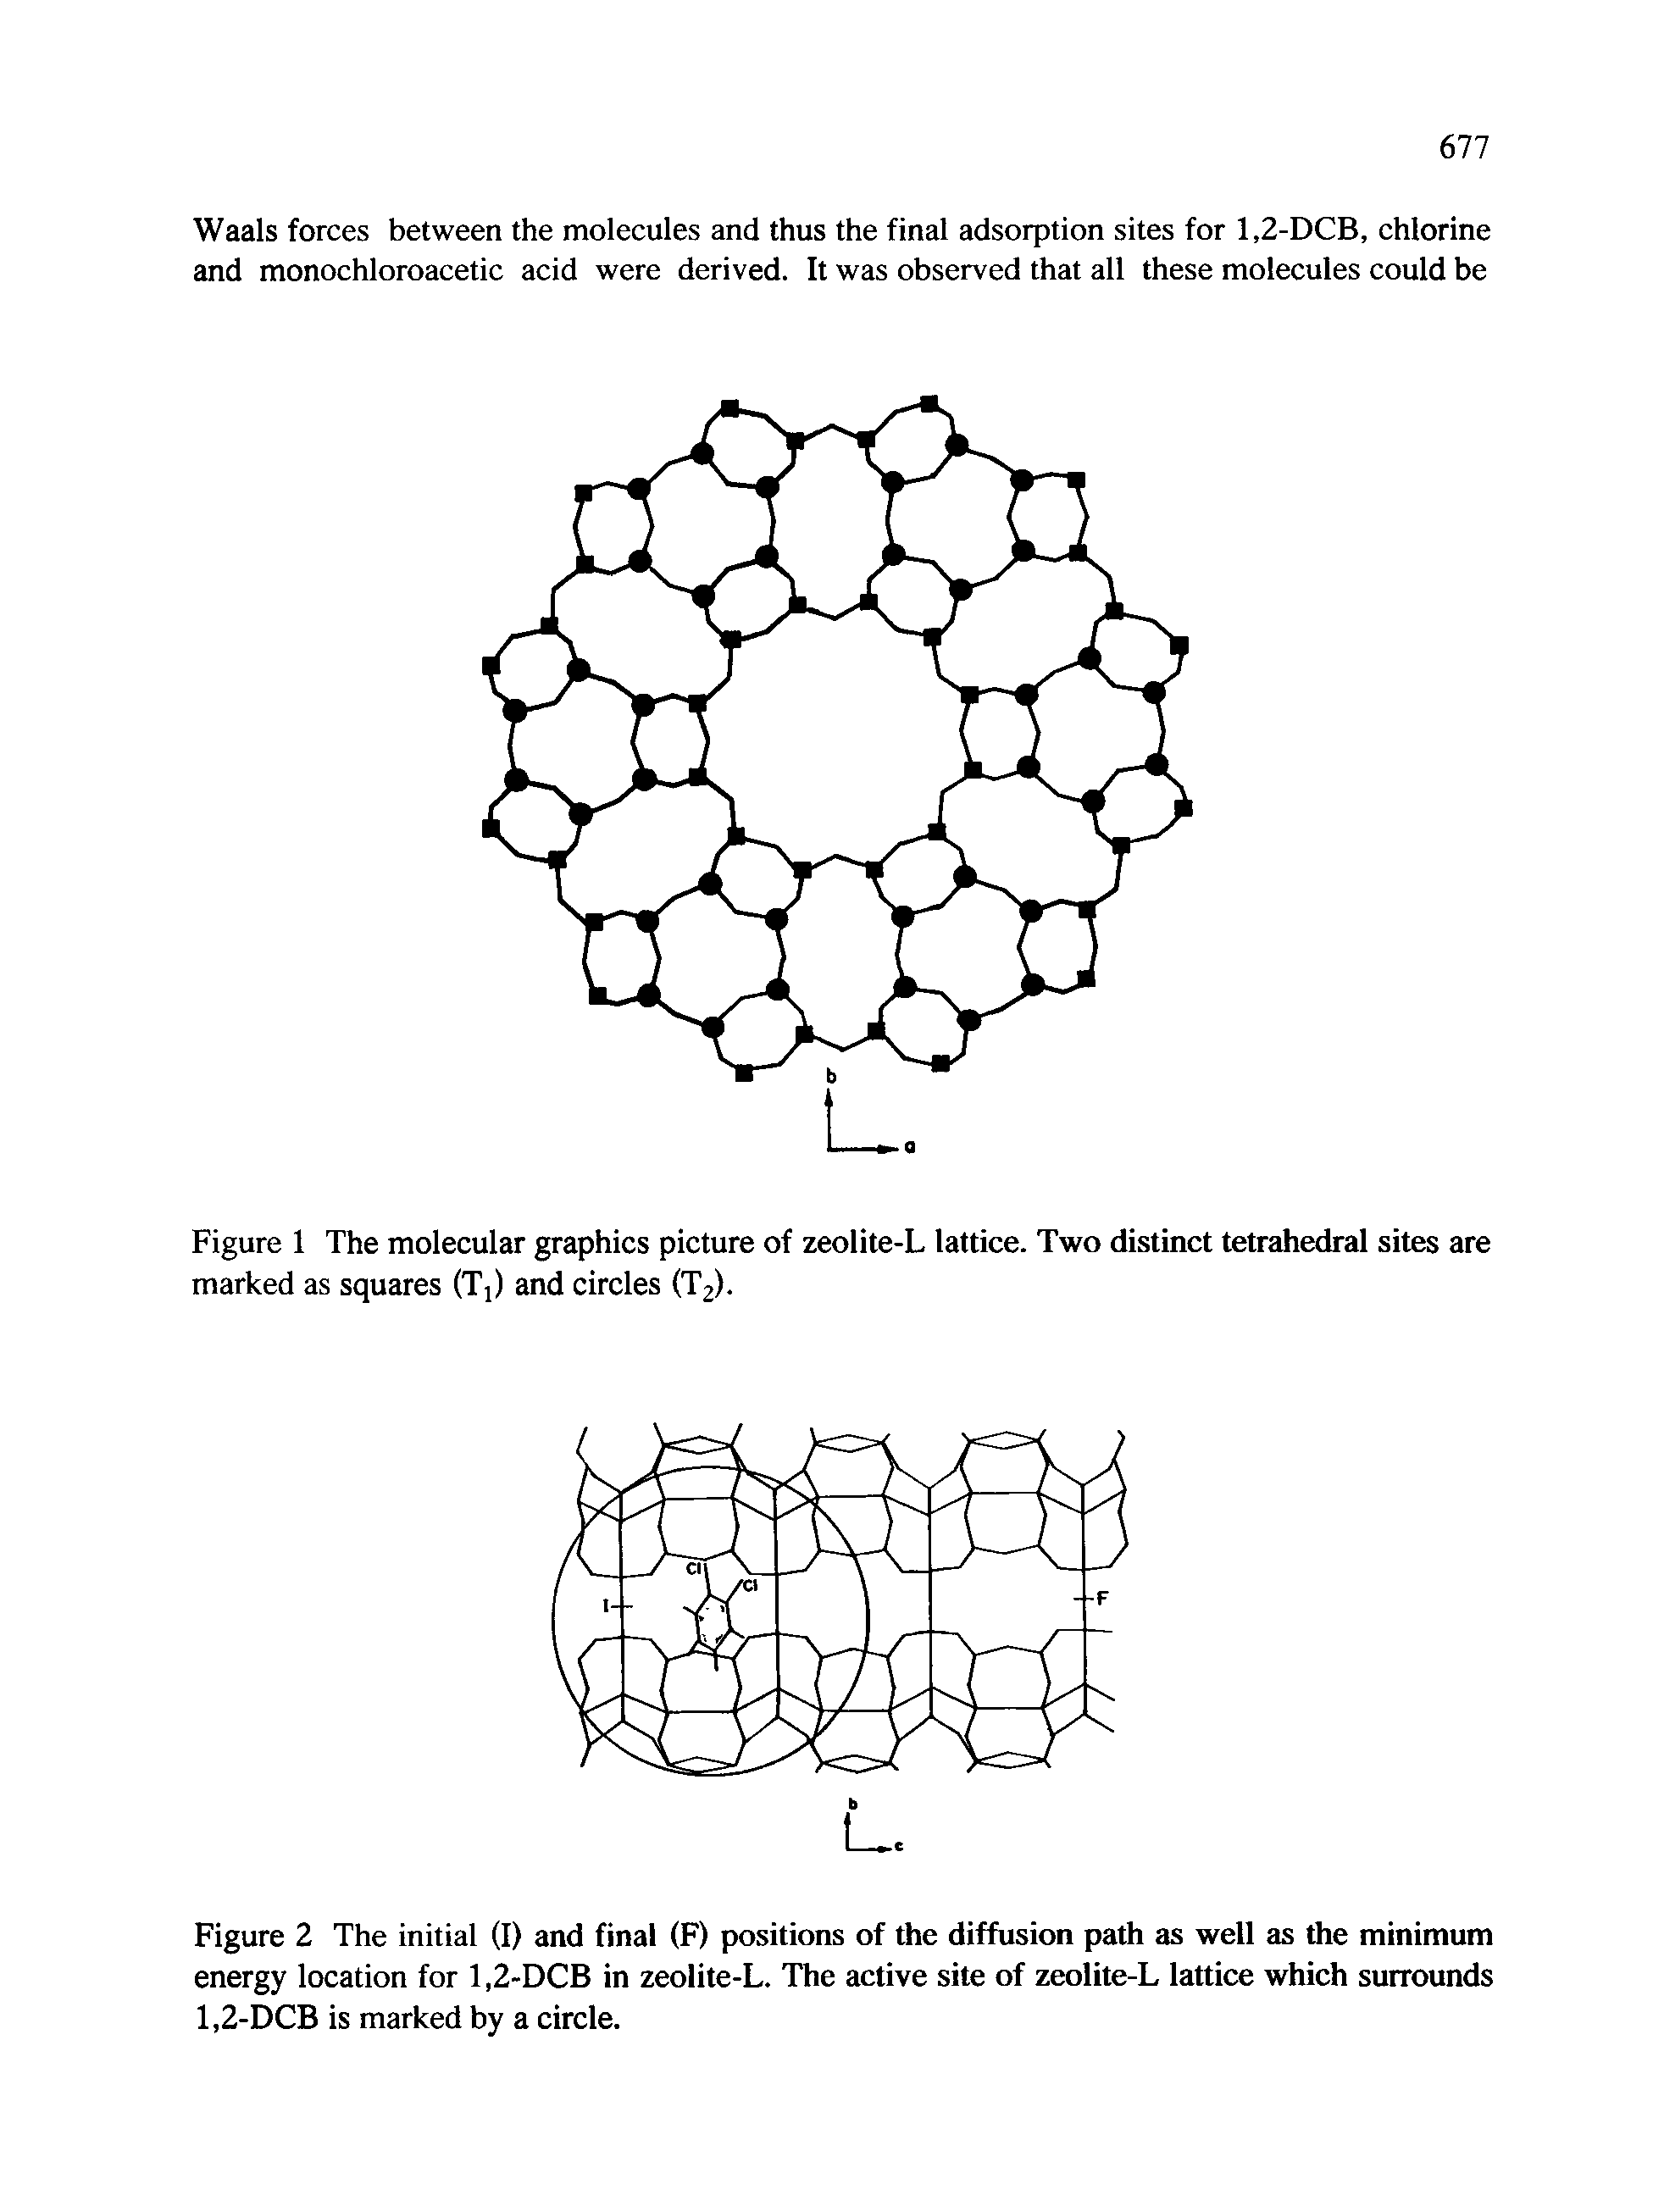 Figure 2 The initial (I) and final (F) positions of the diffusion path as well as the minimum energy location for 1,2-DCB in zeolite-L. The active site of zeolite-L lattice which surrounds 1,2-DCB is marked by a circle.